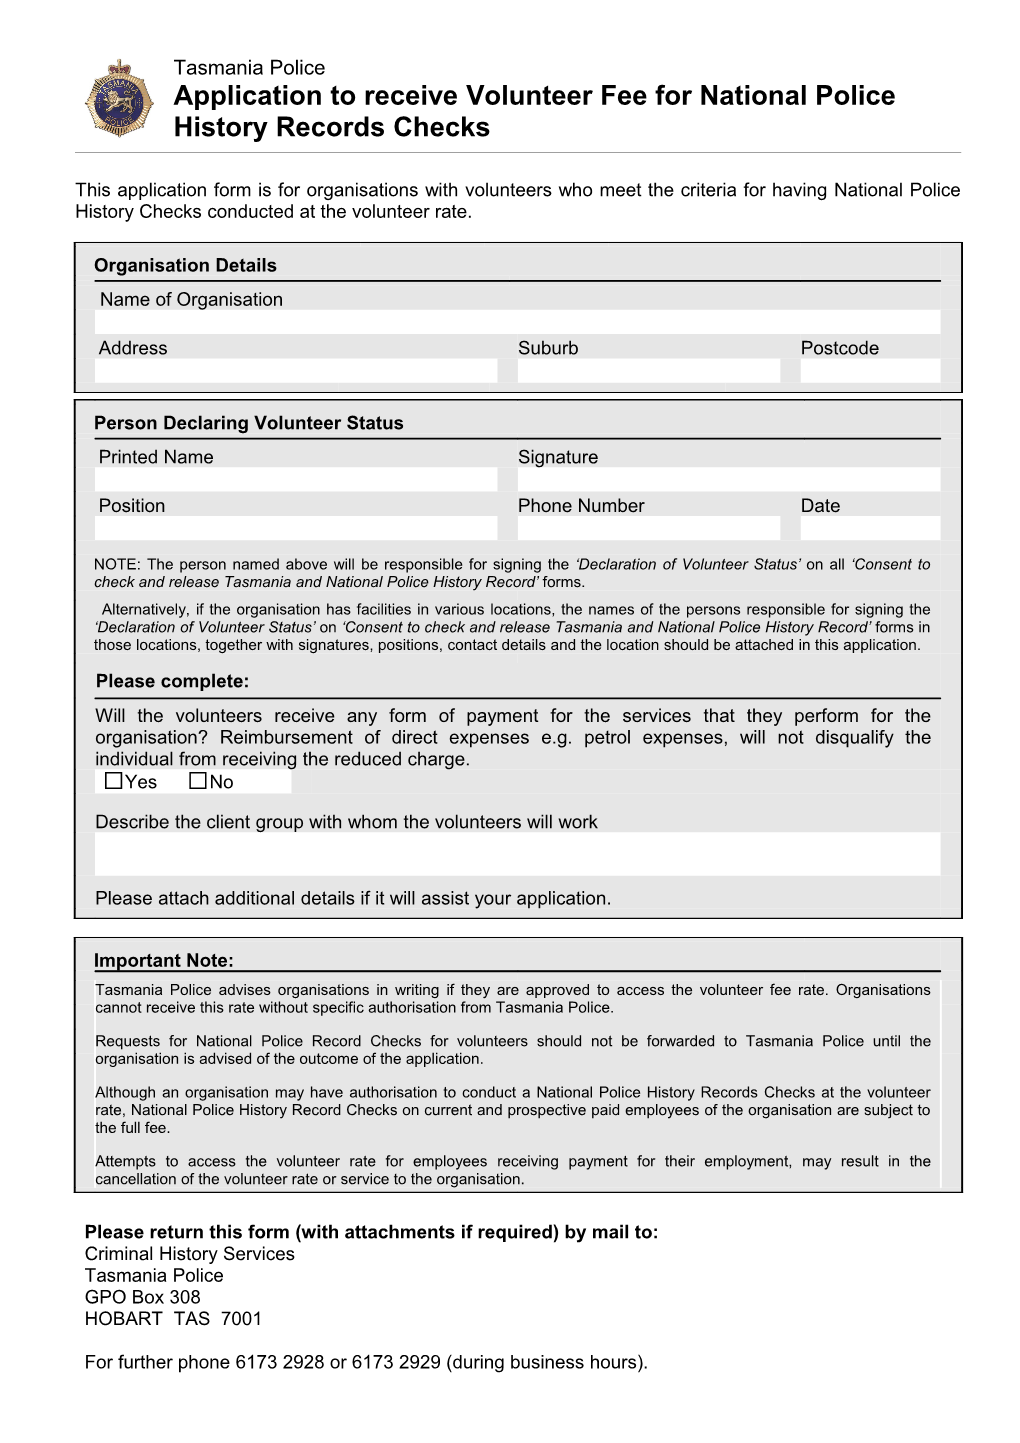 Please Return This Form (With Attachments If Required) by Mail To